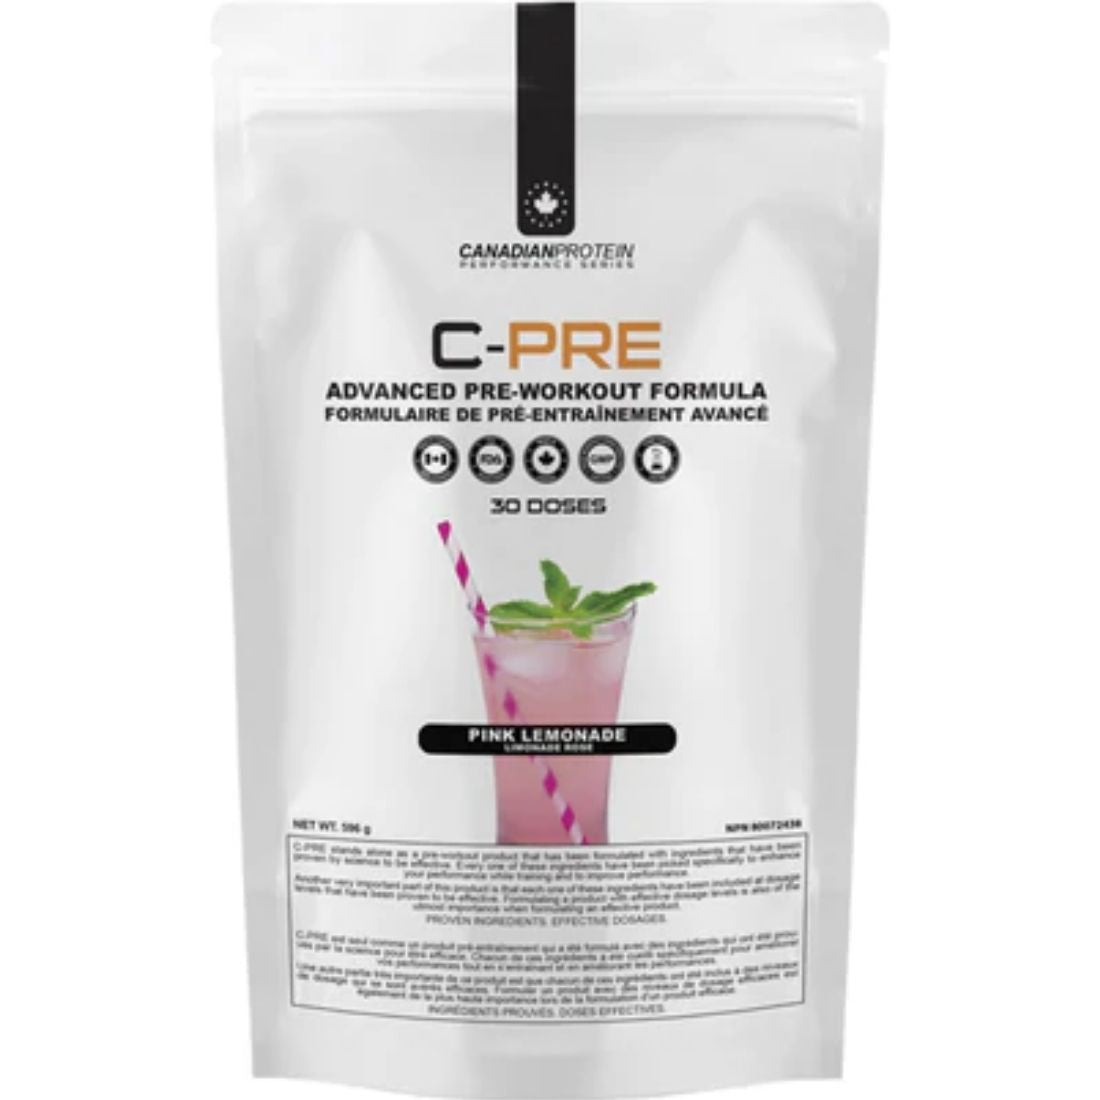 Canadian Protein C-PRE Advanced Pre-Workout Formula